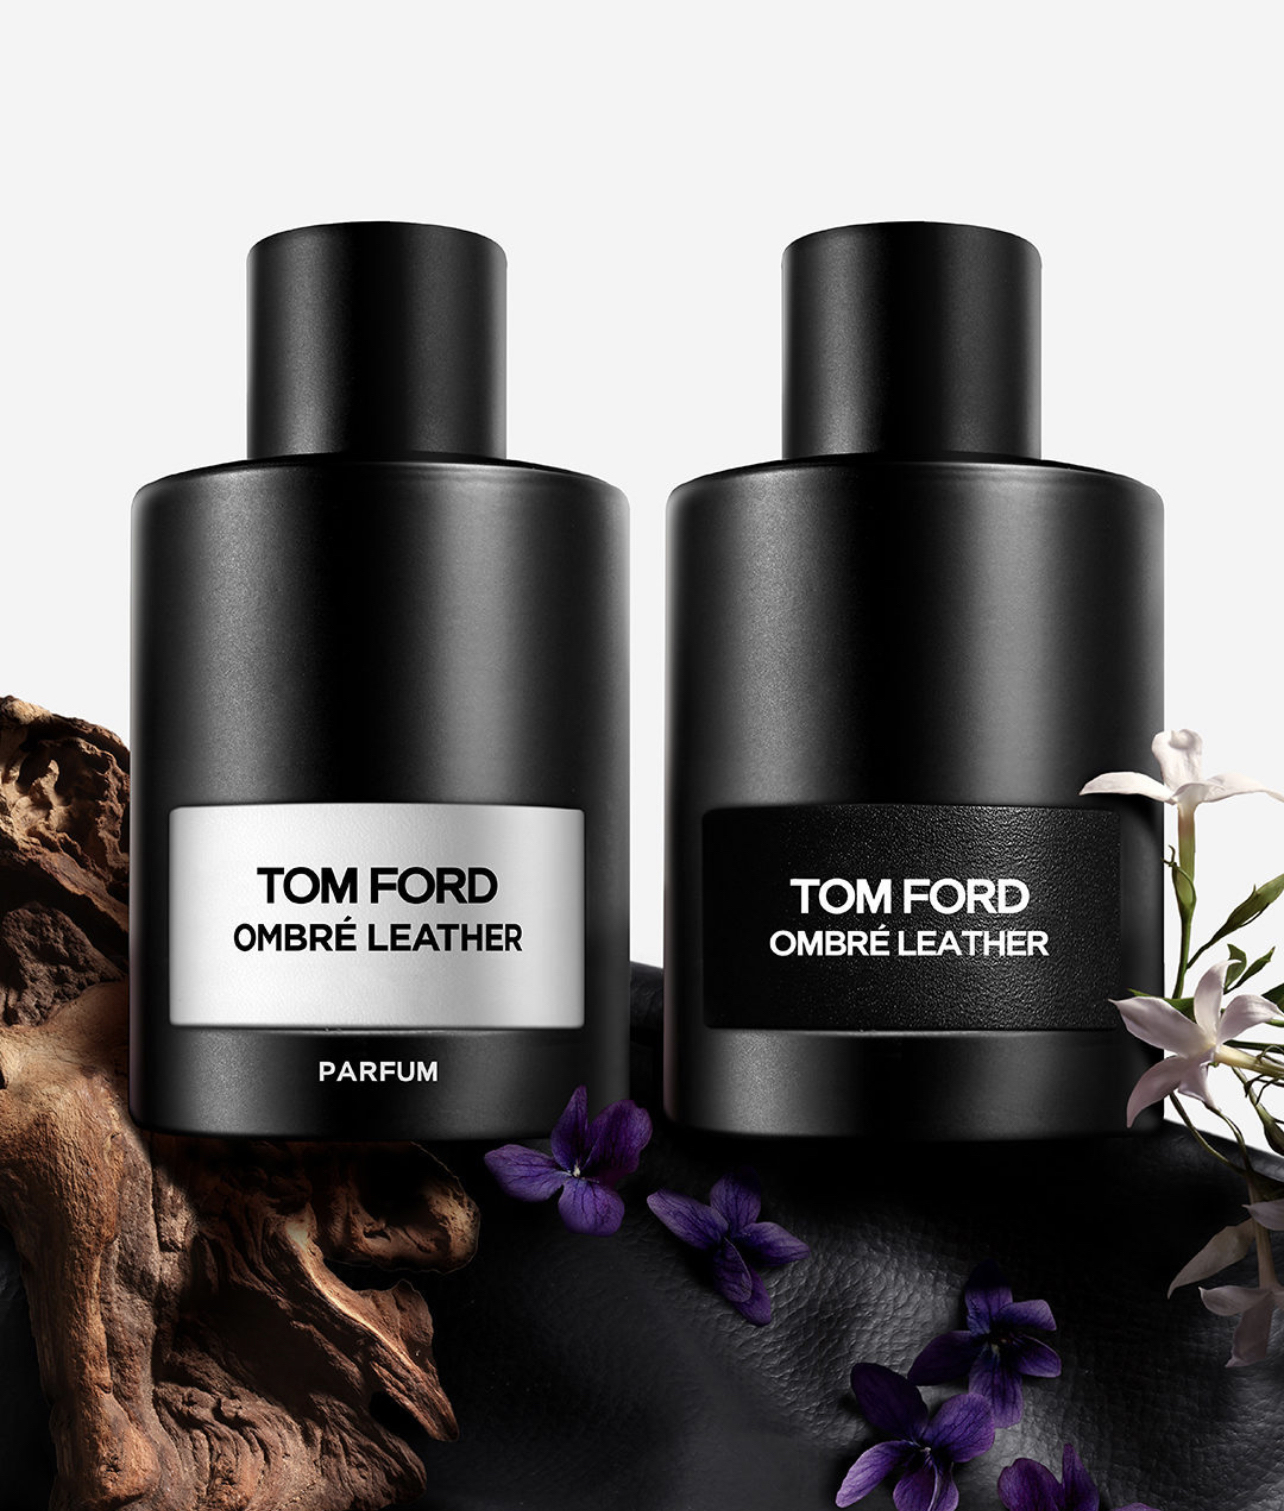 Sale > tom ford ombre leather punmiris > in stock